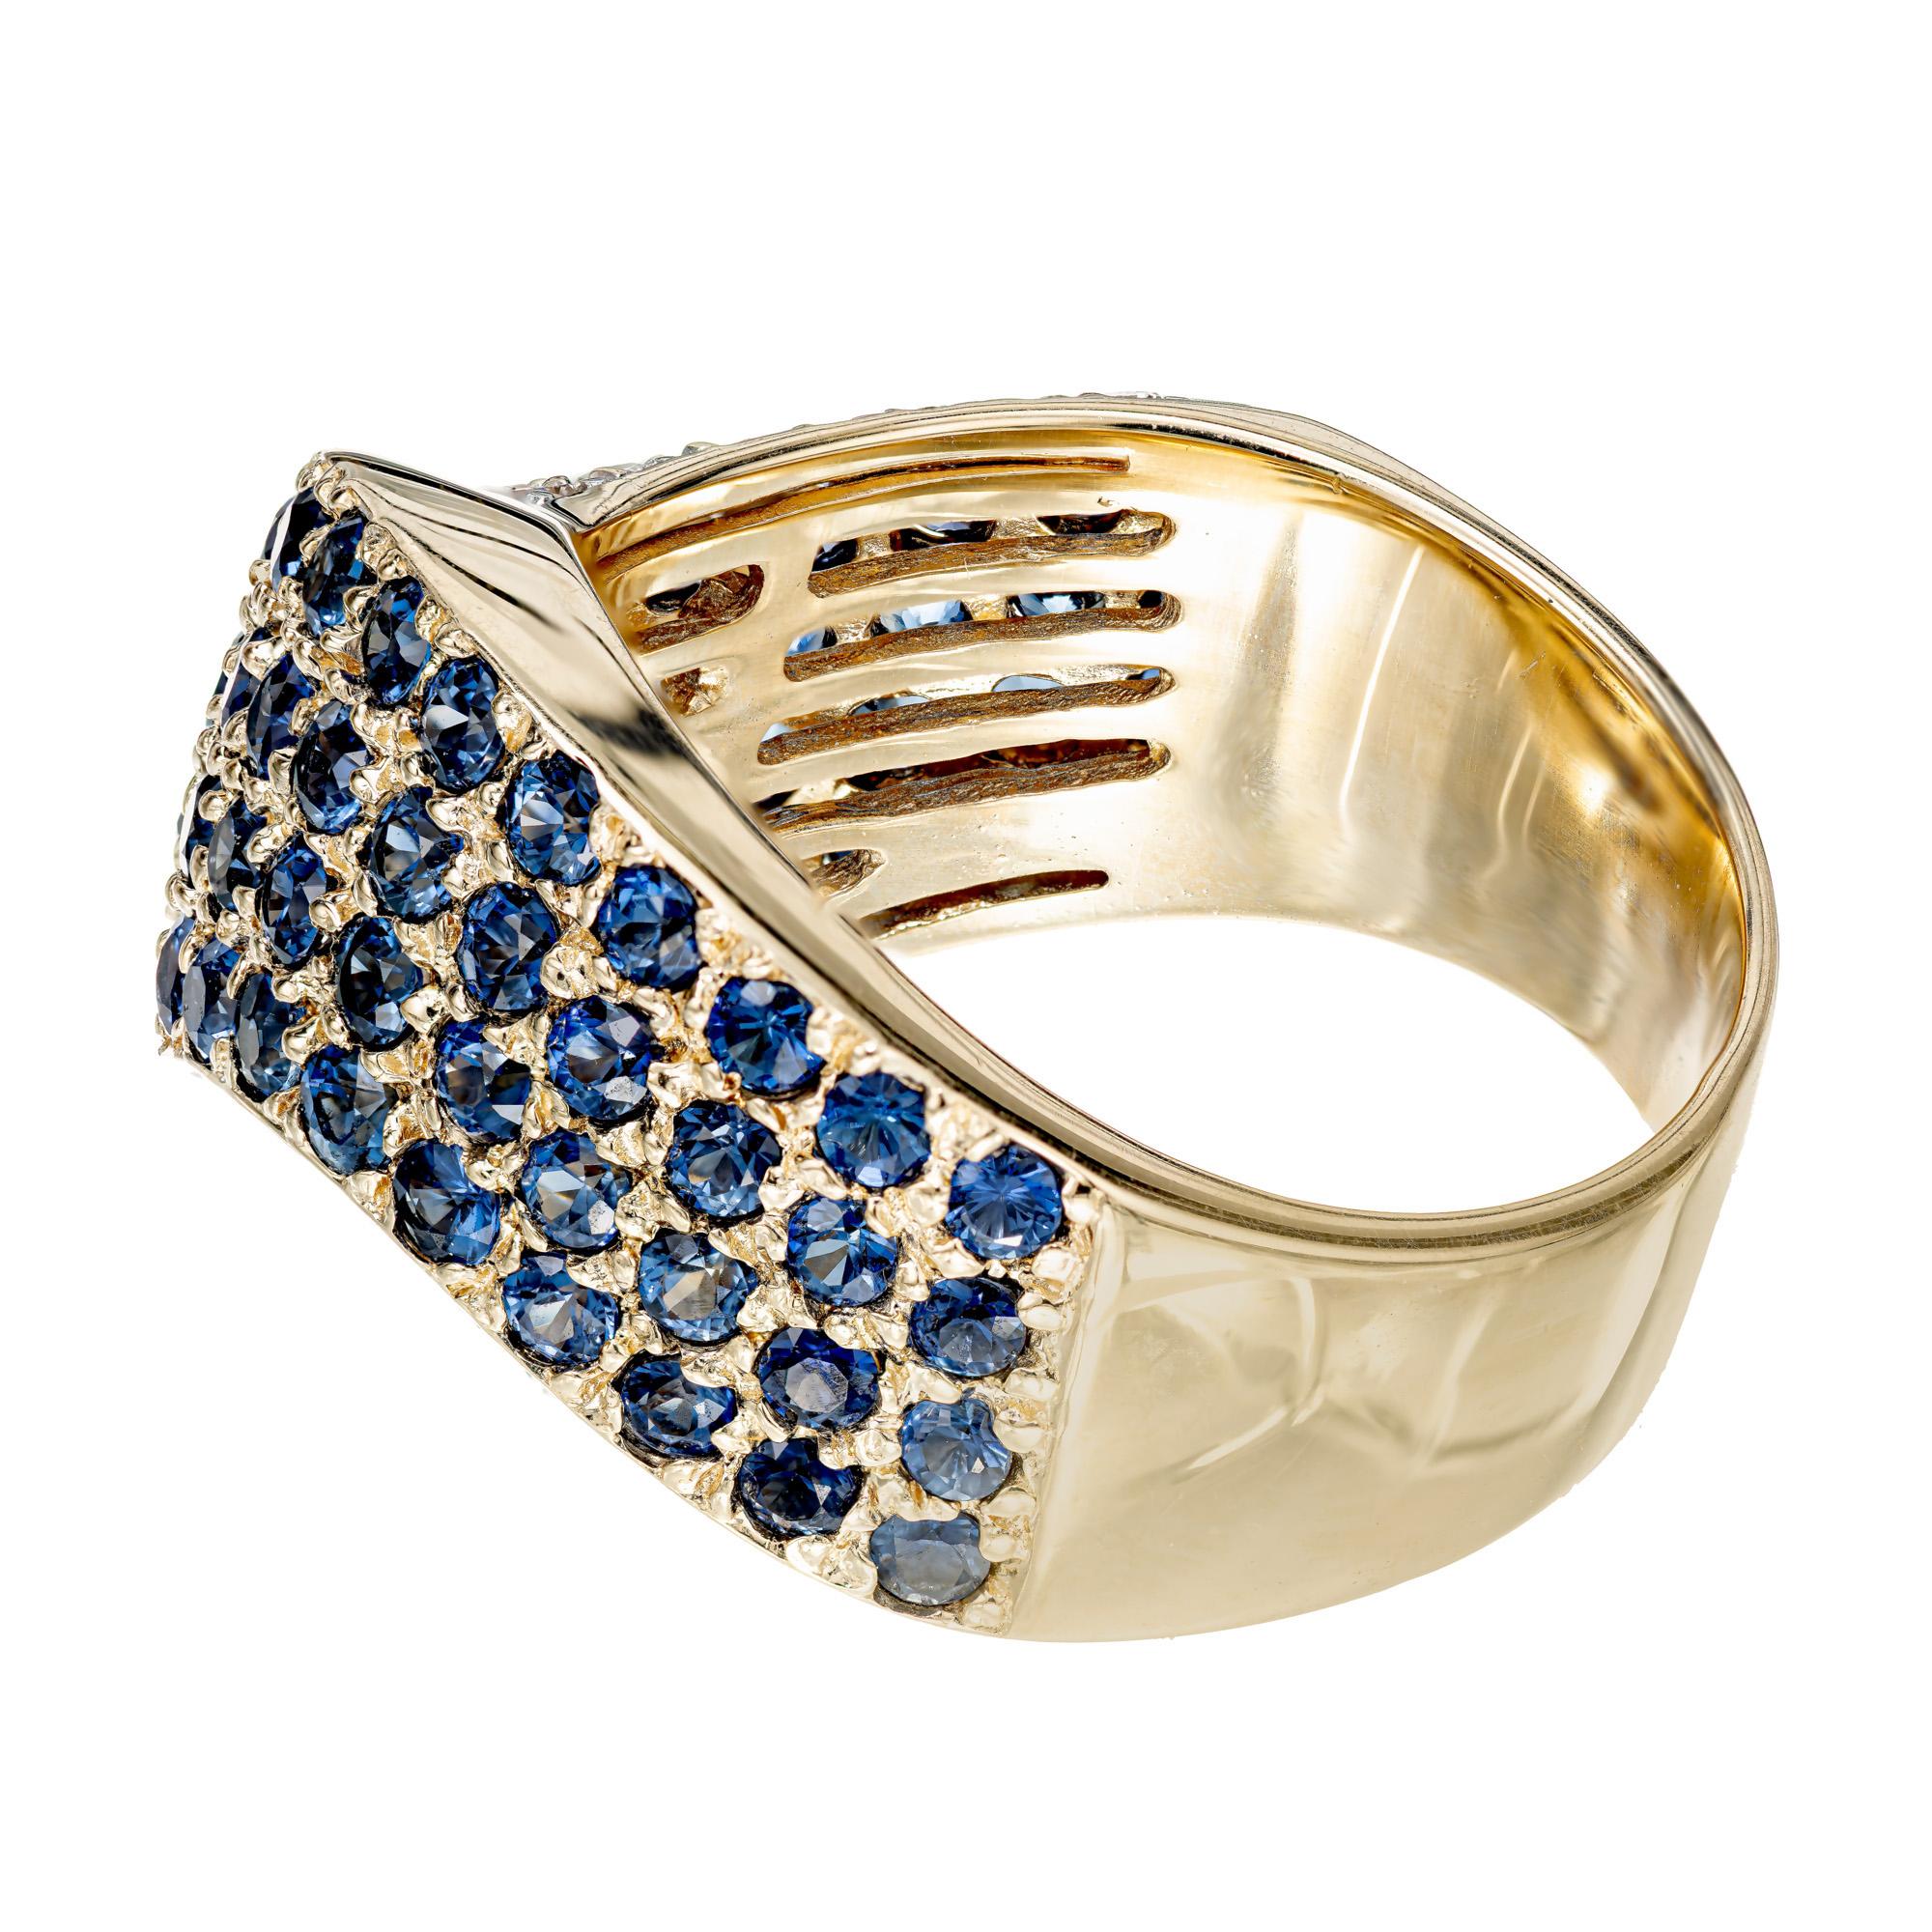 2.70 Carat Blue Sapphire Diamond Gold Domed Swirl Band Ring In Excellent Condition For Sale In Stamford, CT